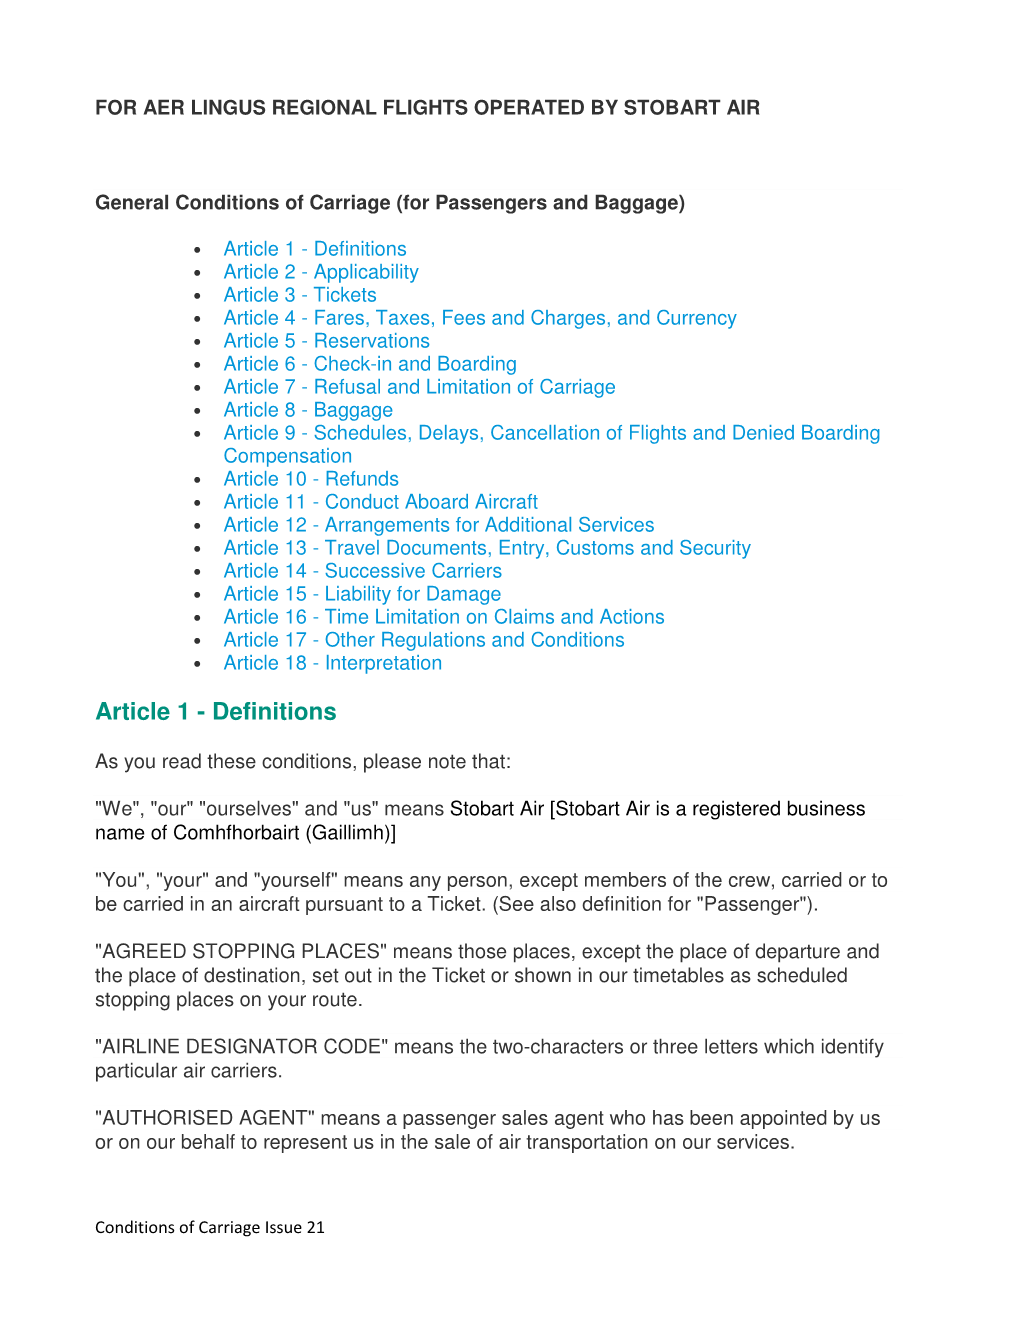 General Conditions of Carriage of Stobart